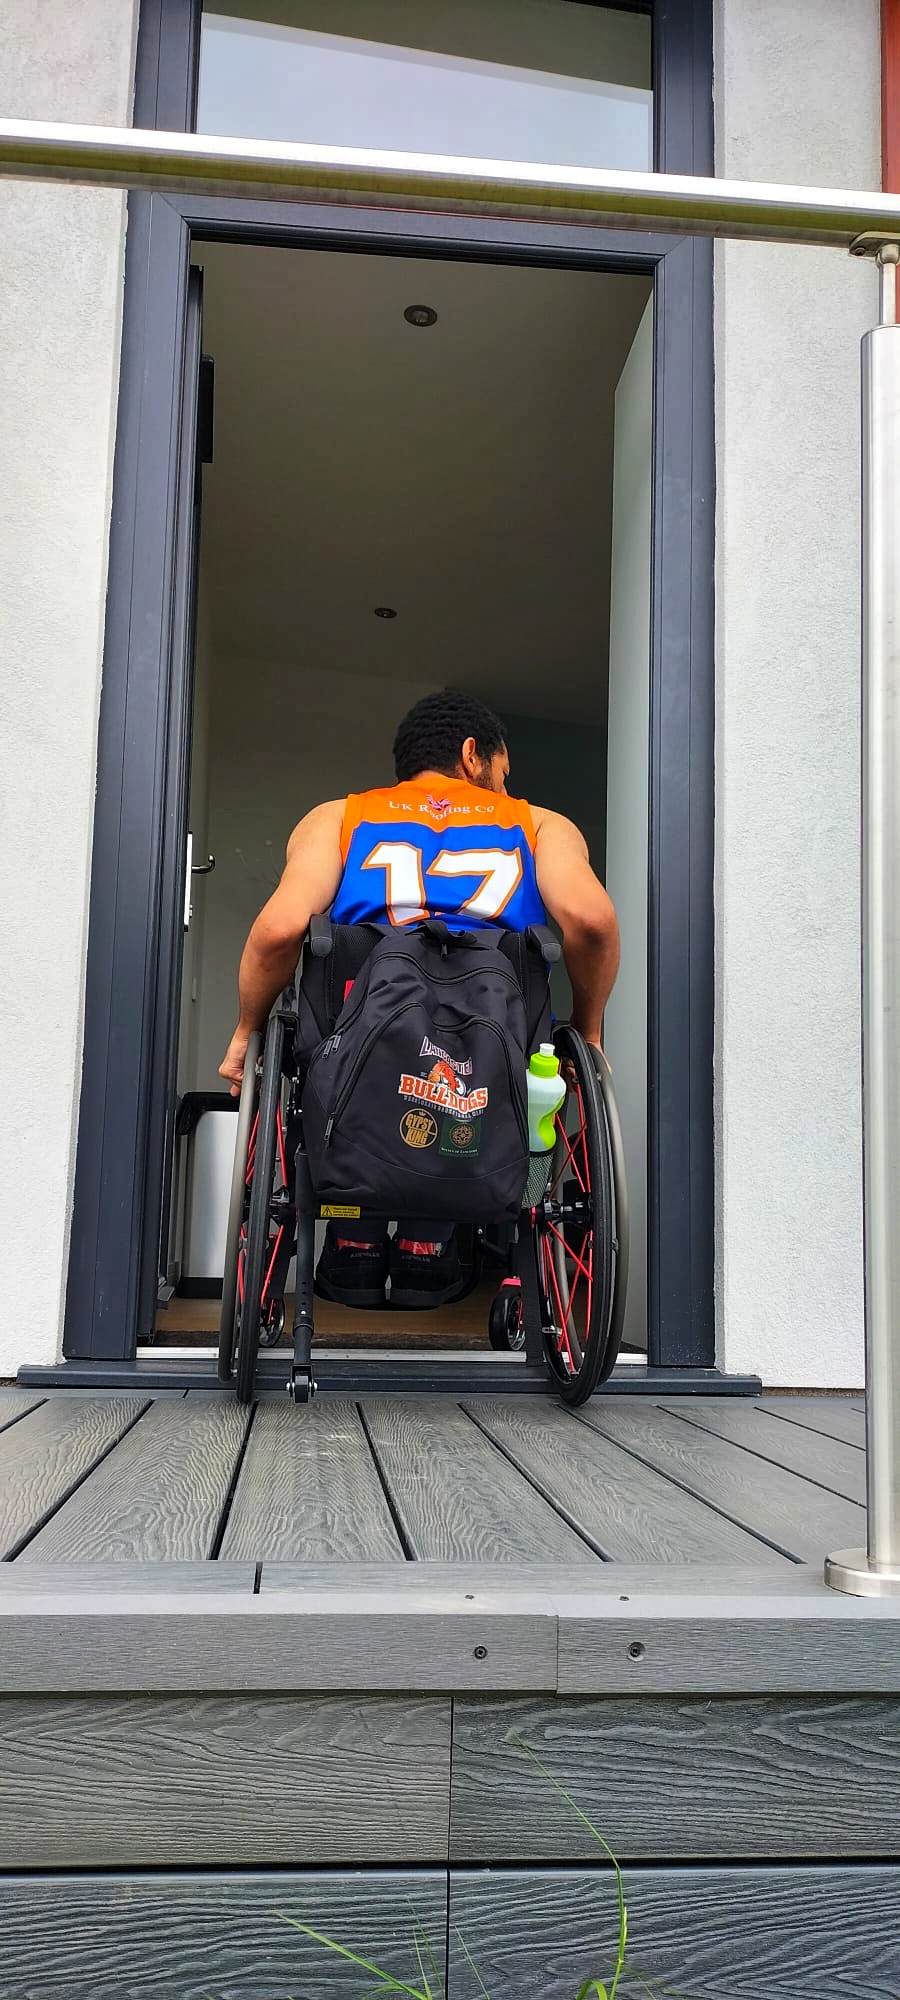 Young man entering the main door in a wheelchair. Brightly coloured top with number 17 on it.